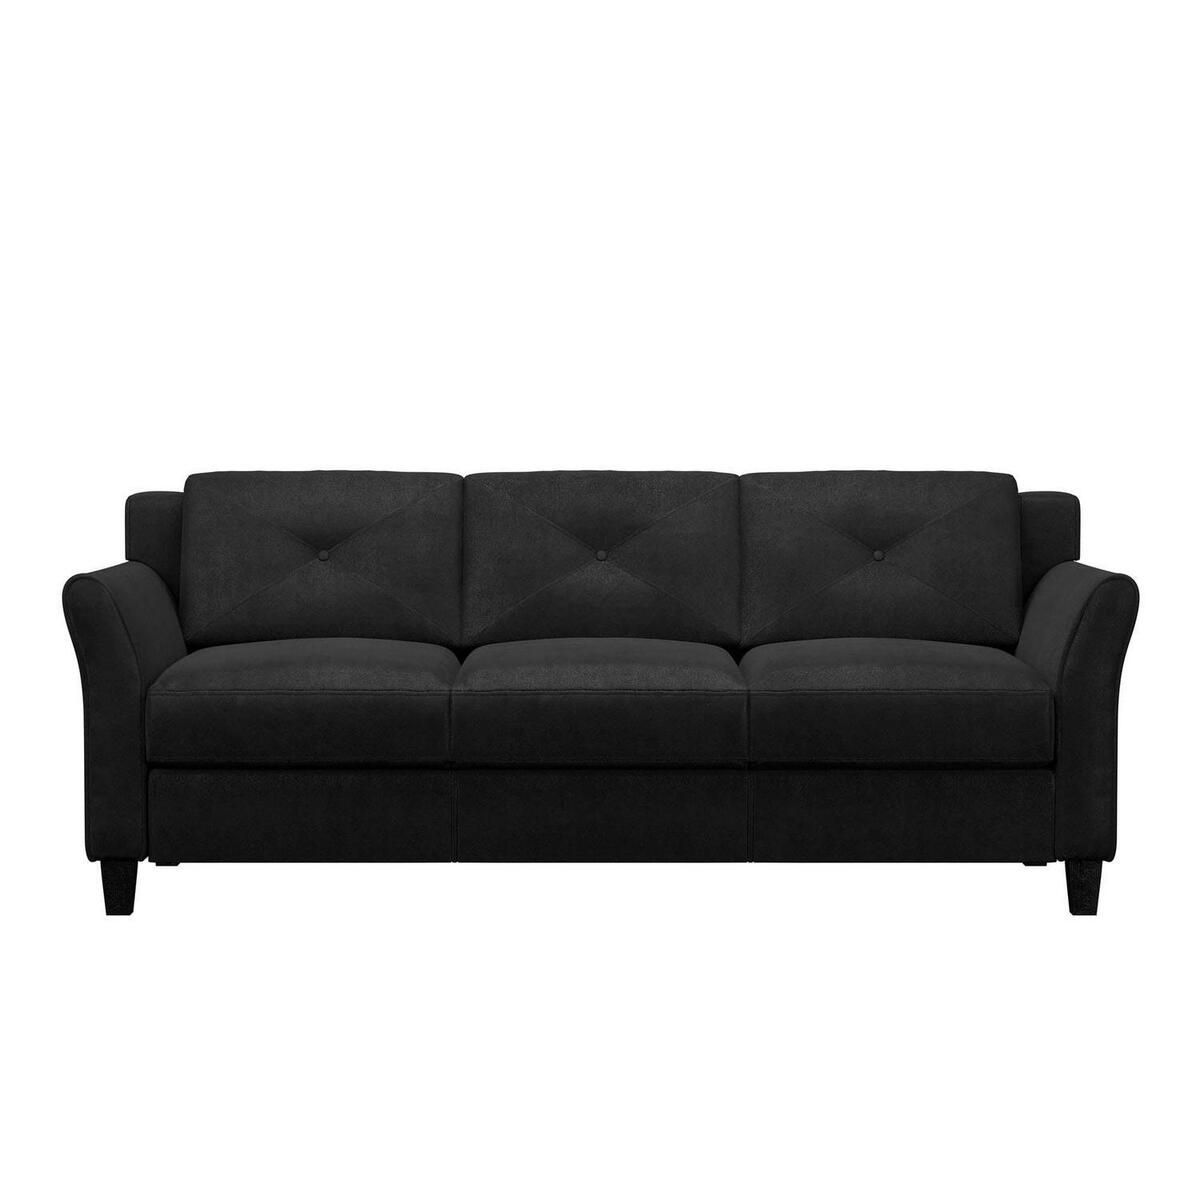 Traditional Sofa Curved Rolled Arms Comfortable Taryn Black Fabric | Ebay With Traditional Black Fabric Sofas (View 4 of 15)